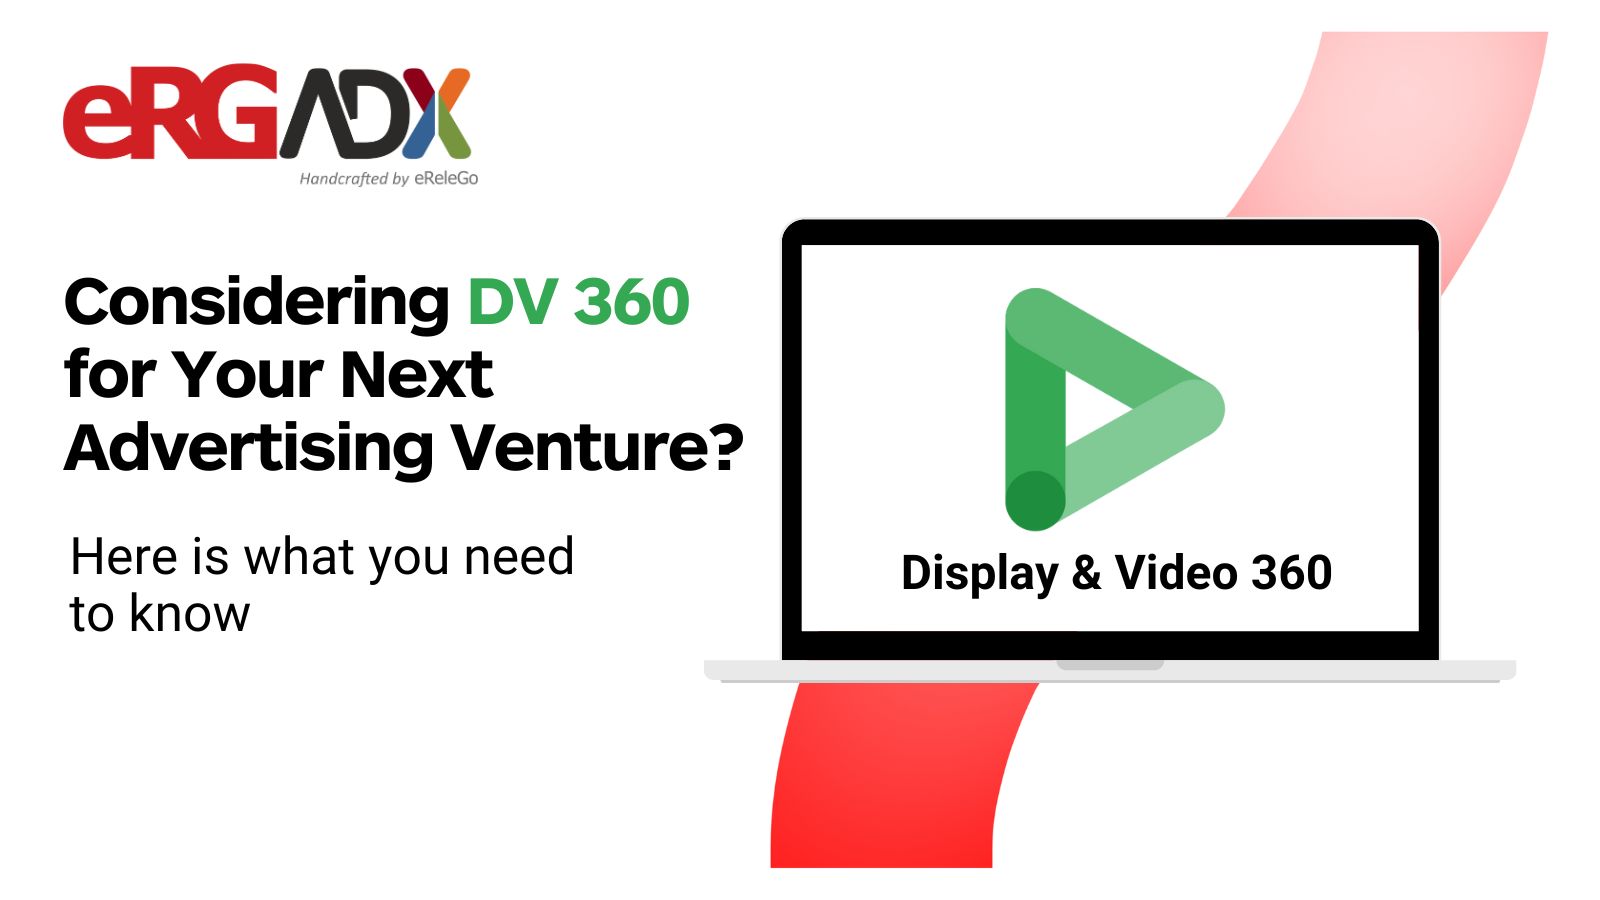 Considering DV 360 for your next advertising venture? Here is what you need to know 